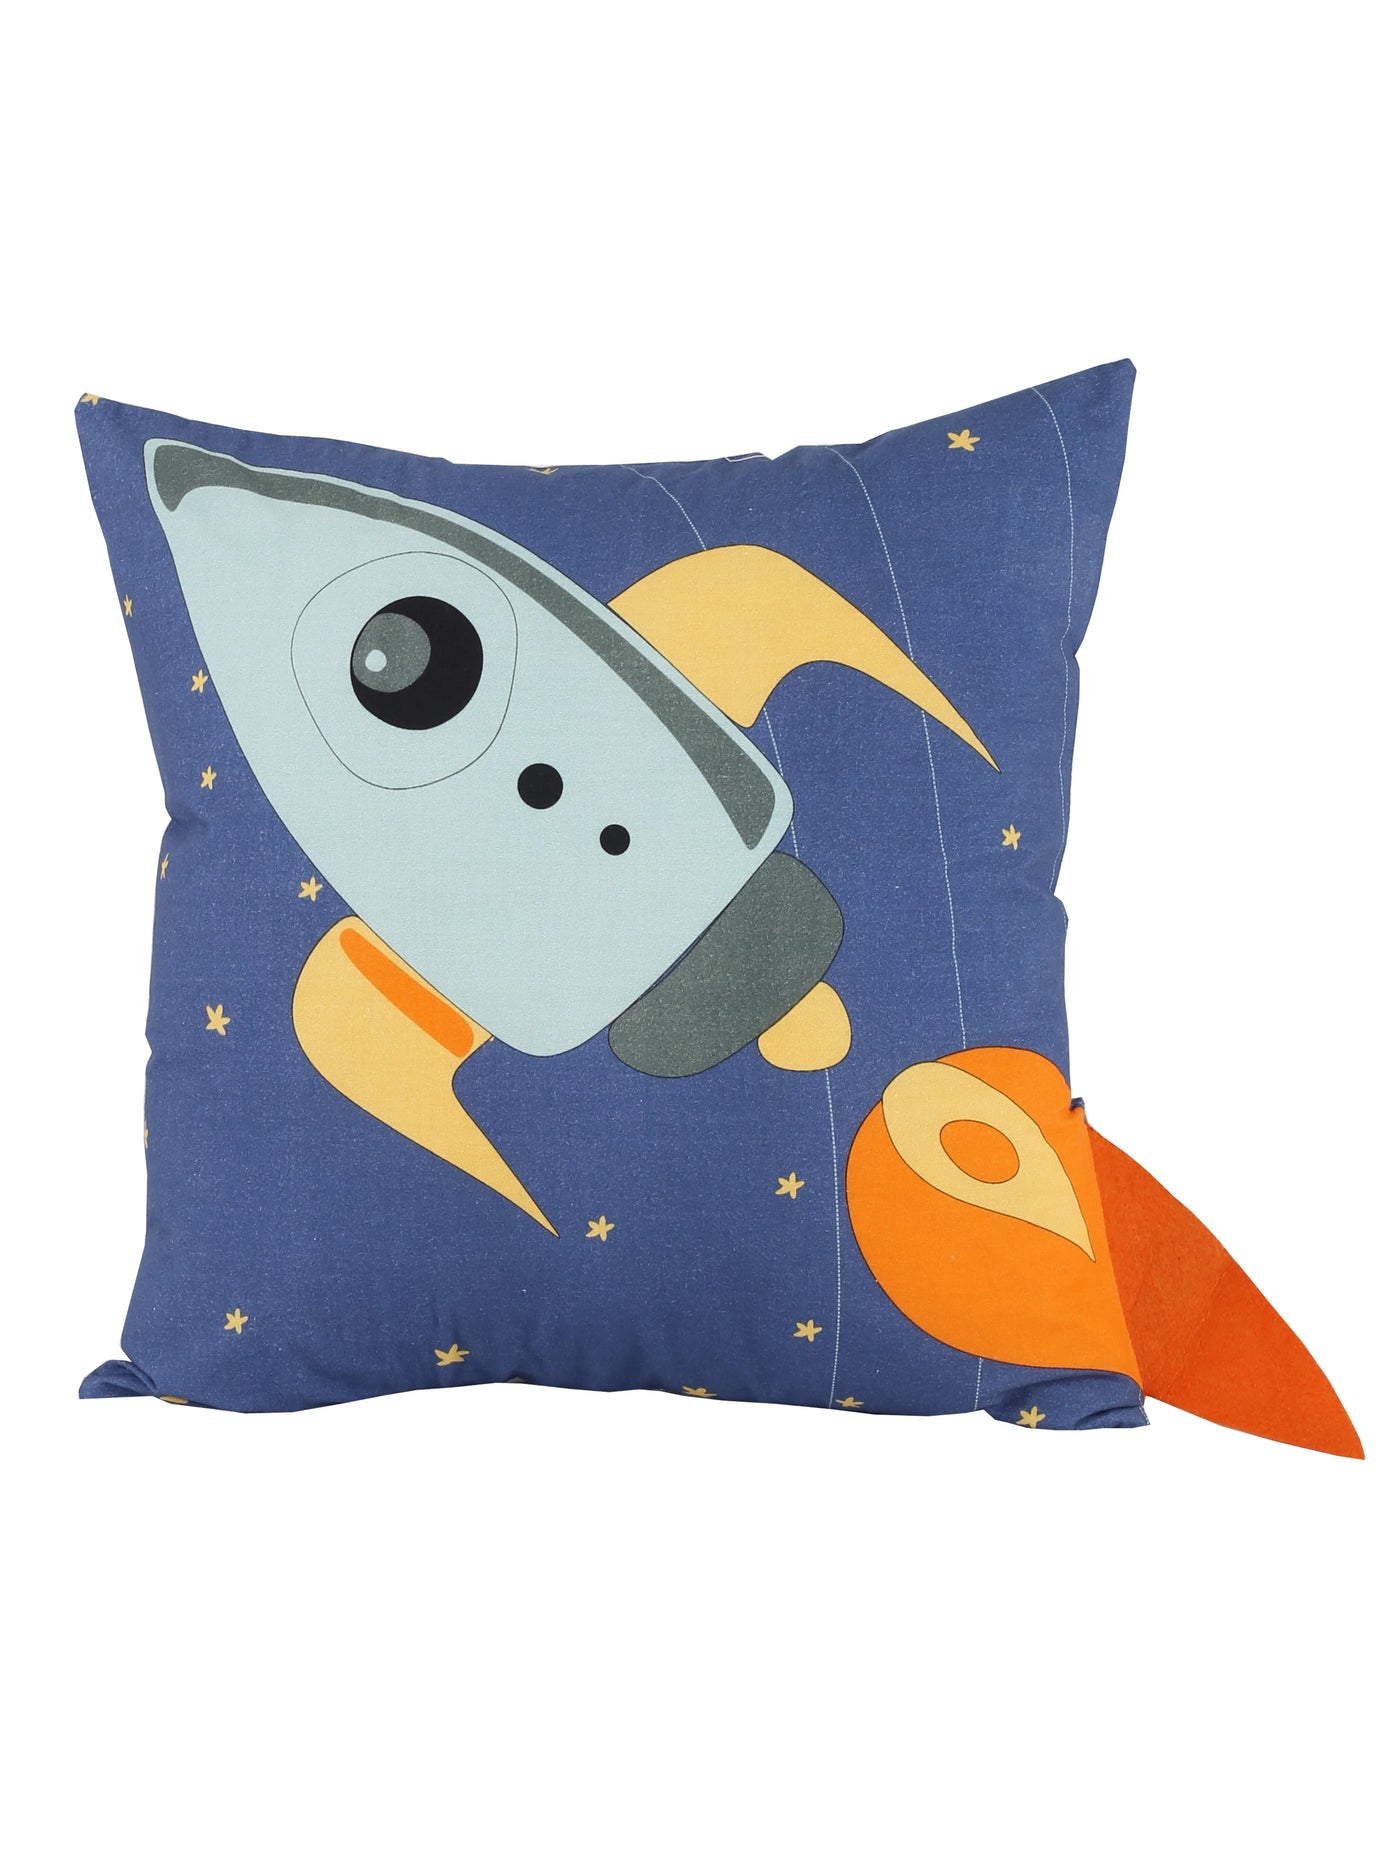 The Tiny Spacecraft Cushion Cover